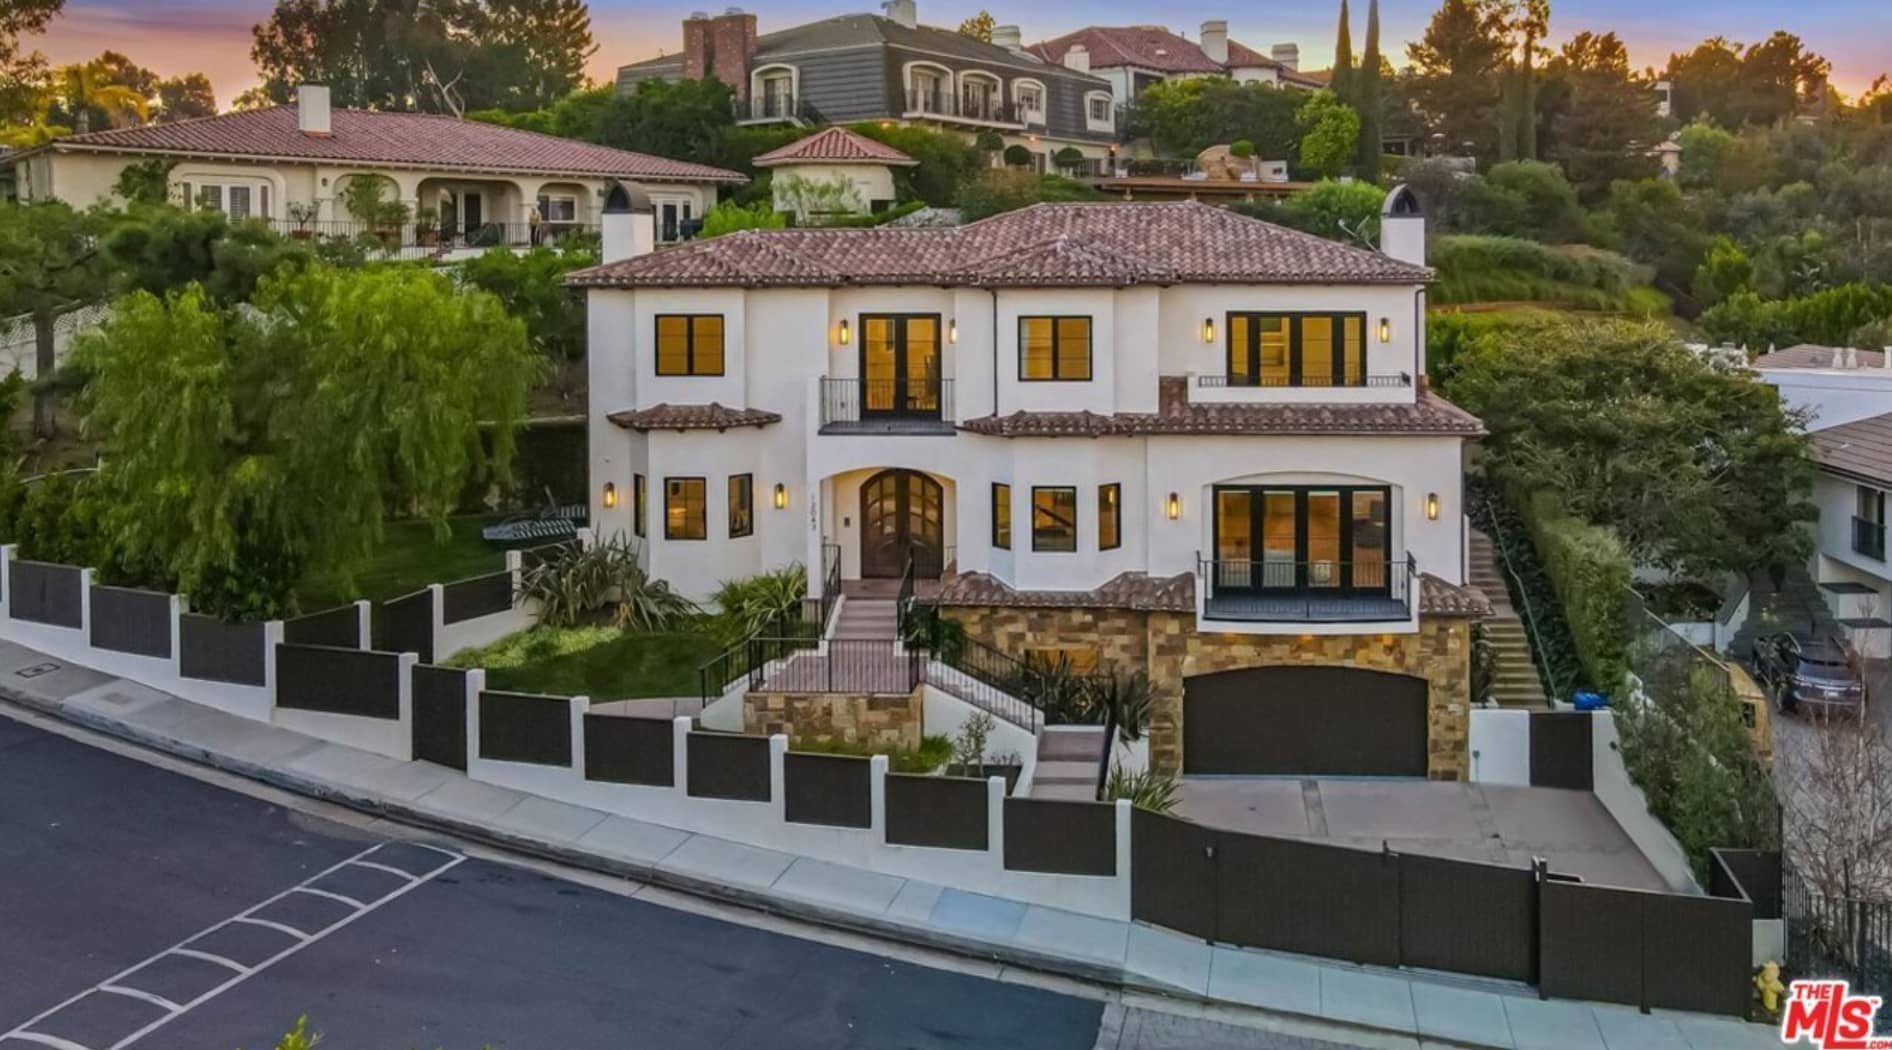 Serena Williams Lists Gated Beverly Hills, California, Home for